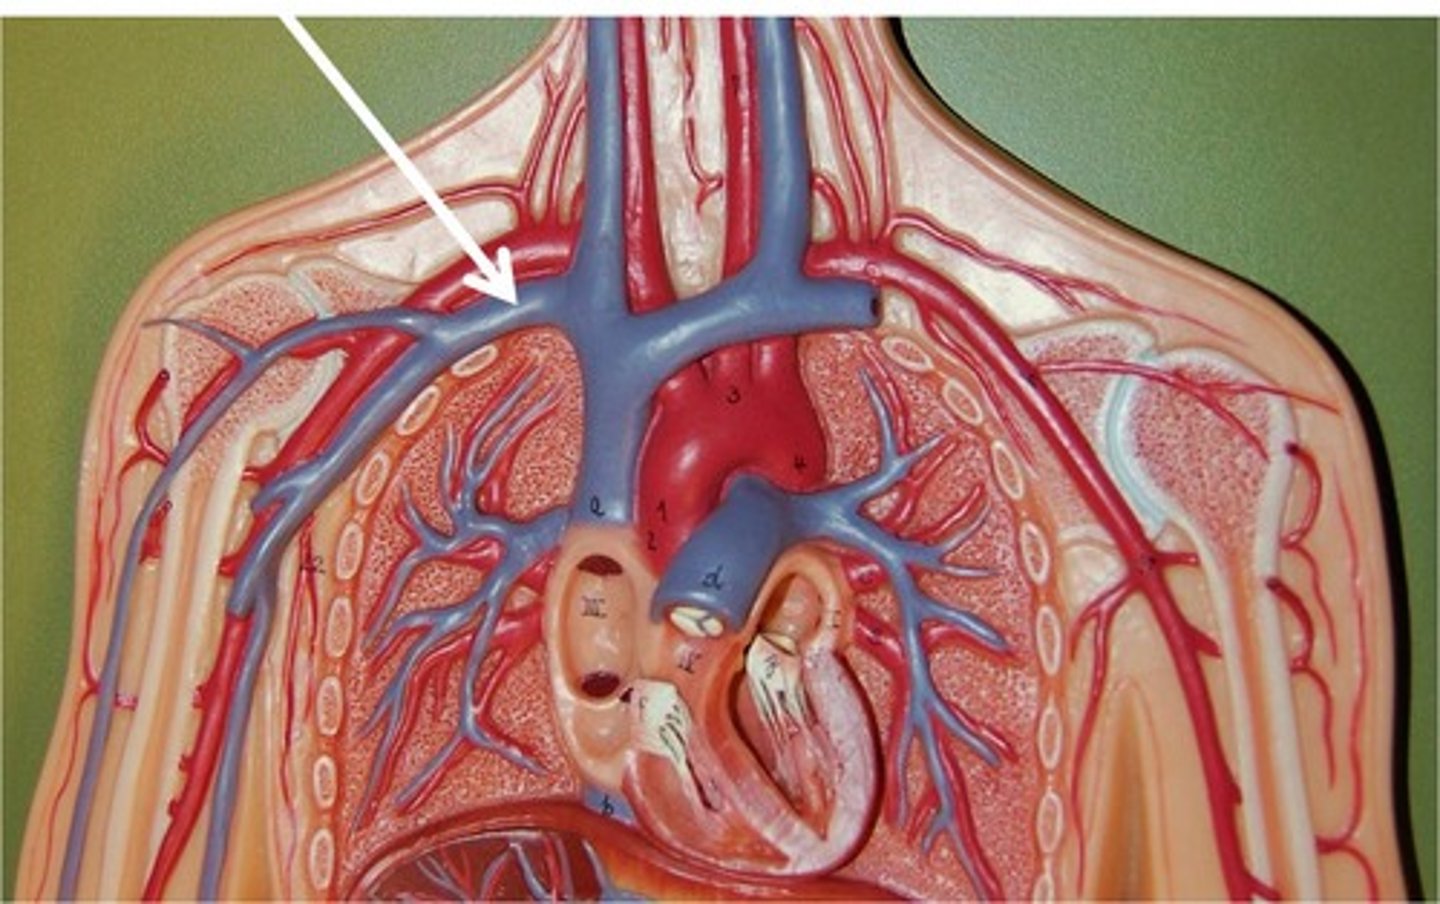 <p>The fourth set of vessels to emerge from the cranial vena cava, medially. These veins carry blood from the subscapular veins and axillary veins to the brachiocephalic veins.</p>